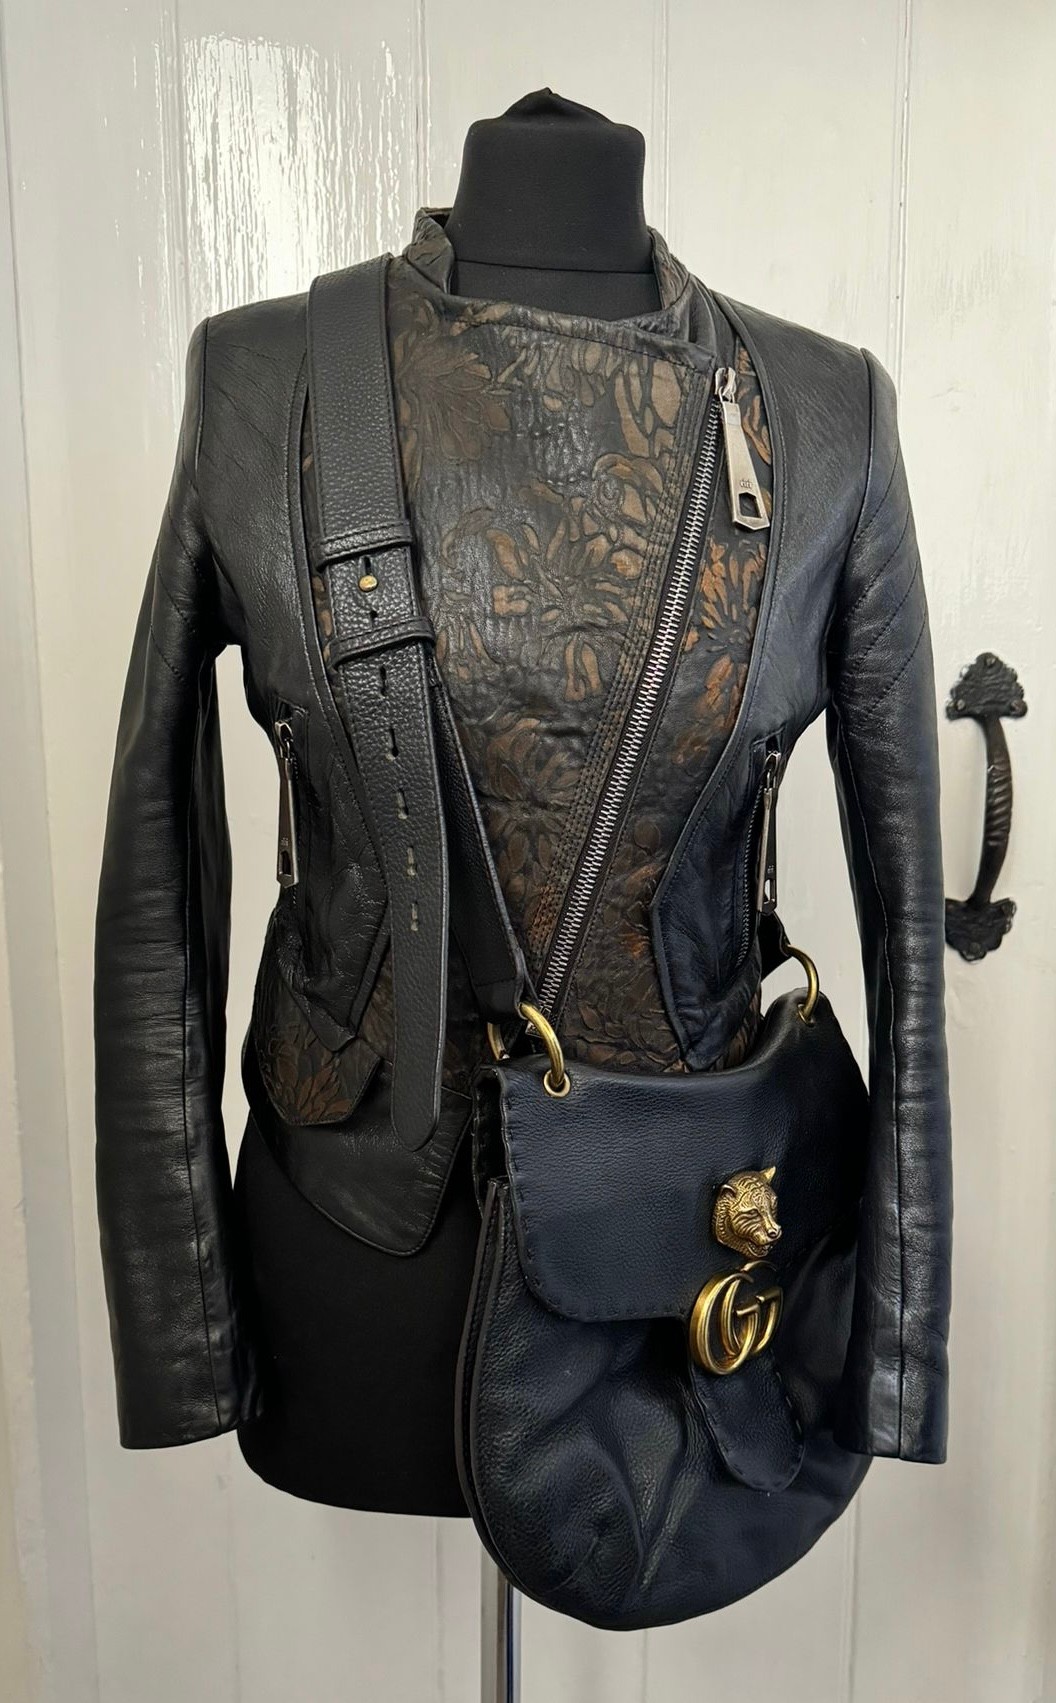 A real black leather jacket by Deja - Vu along with a genuine black leather Gucci Marmont bag.